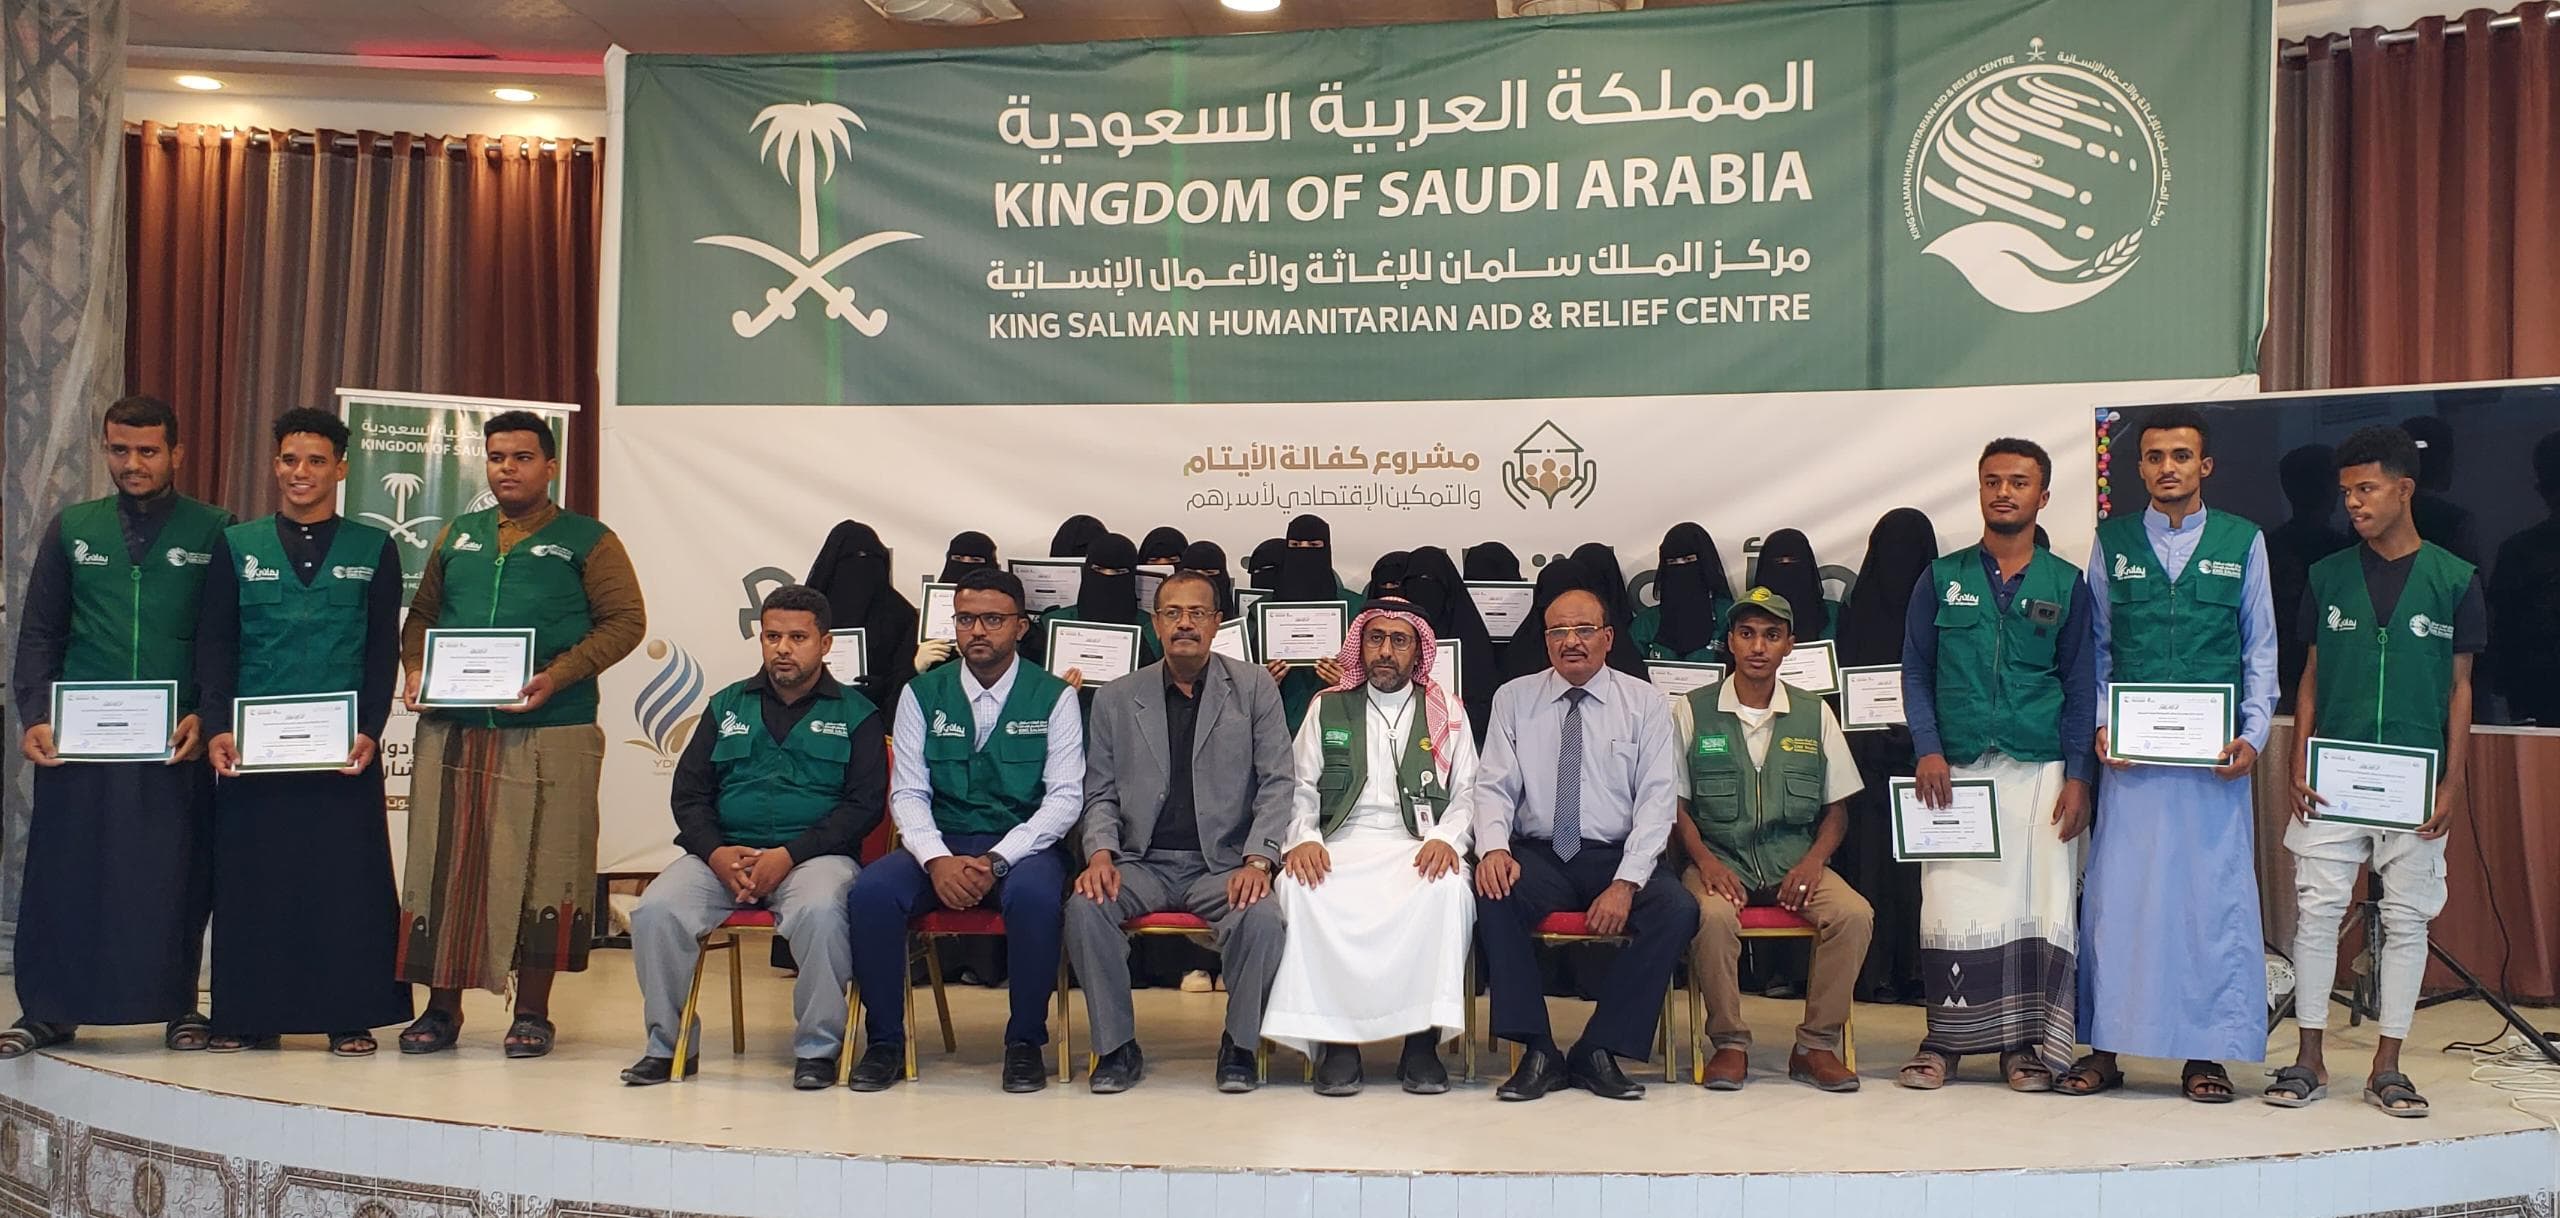 With Saudi support, the distribution of vocational tools and economic empowerment to orphans in Wadi Hadhramout.